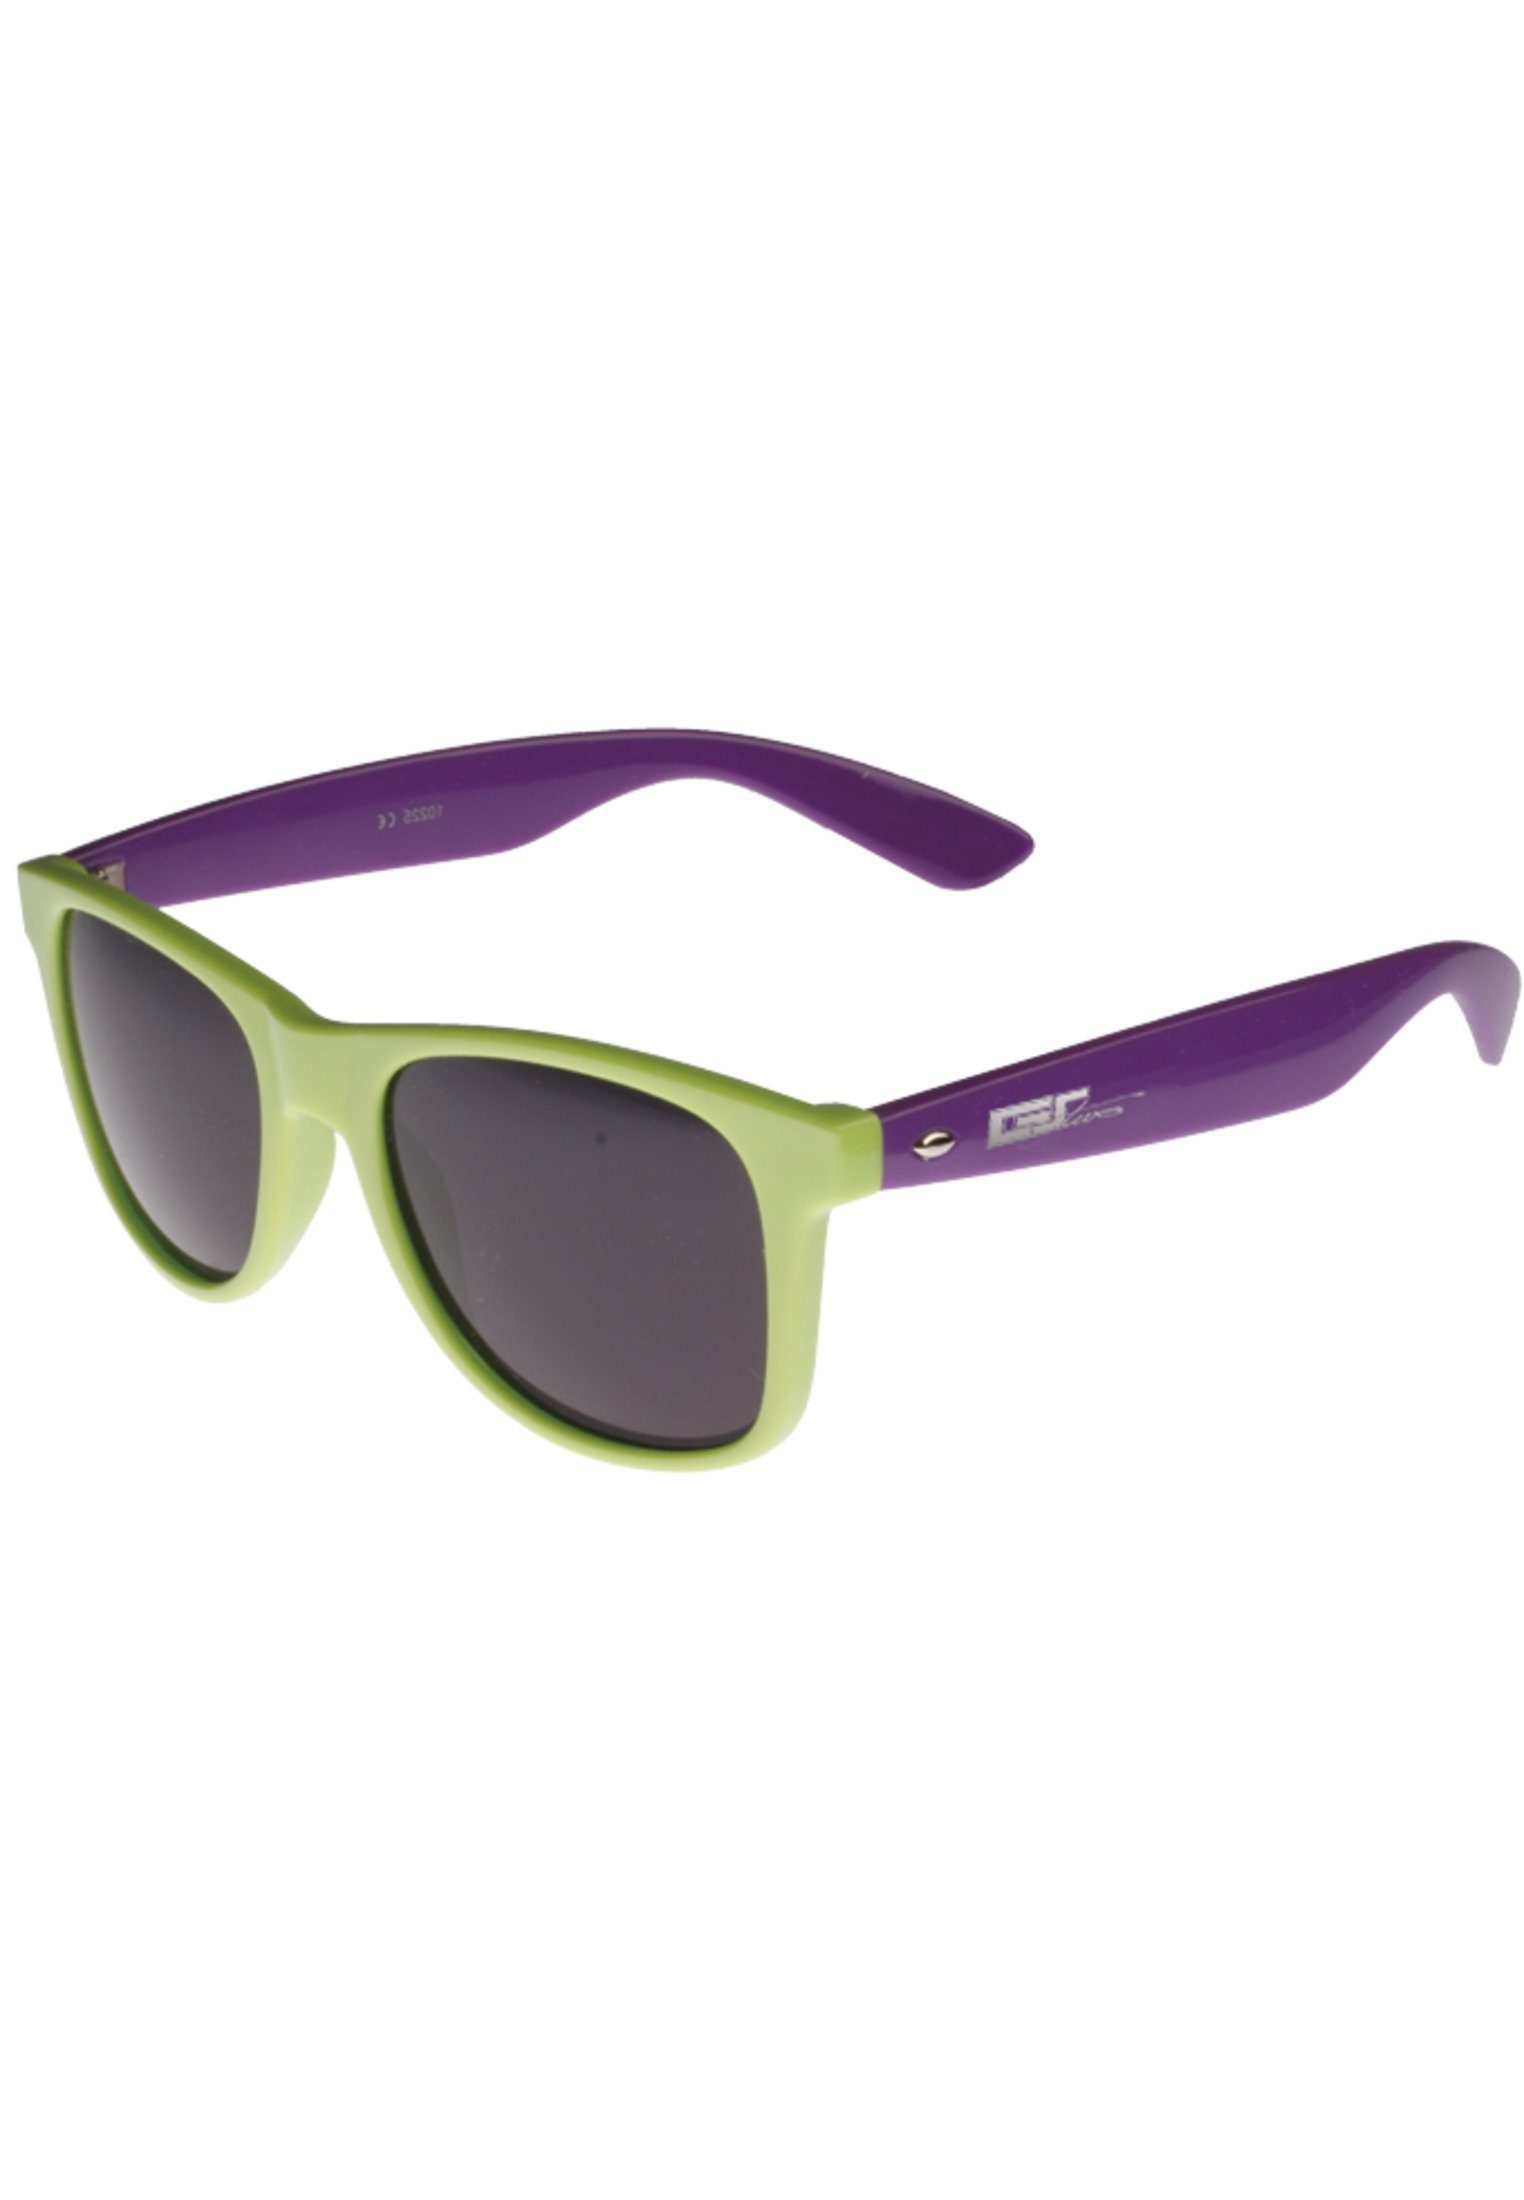 Groove limegreen/purple GStwo MSTRDS Accessoires Shades Sonnenbrille